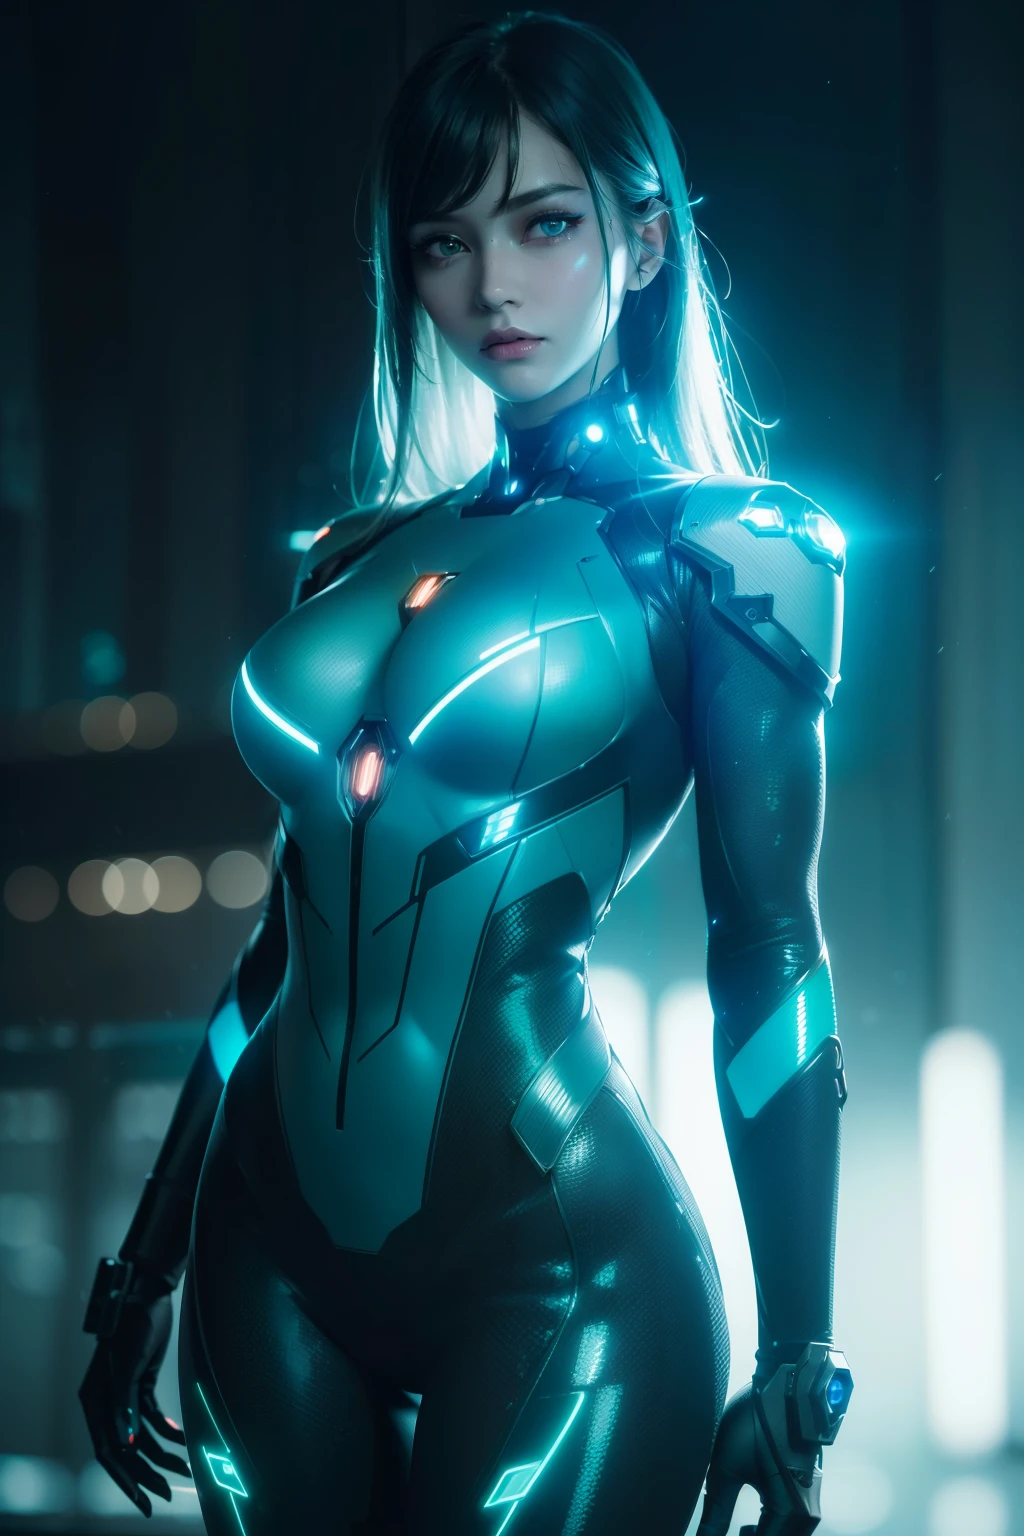 (best quality) cyborg realistic and intricate perfect beauty face, detailed sharp galaxy glowing eyes, detailed face, (((body focus), standing))), (((thin beauty shape))), ((in realistic neon-lit sci-fi plugsuit mech mteal parts)), (masterpiece), 4k, UHD, cinematic illumination 8k, sharp focus, rain of cherry petals